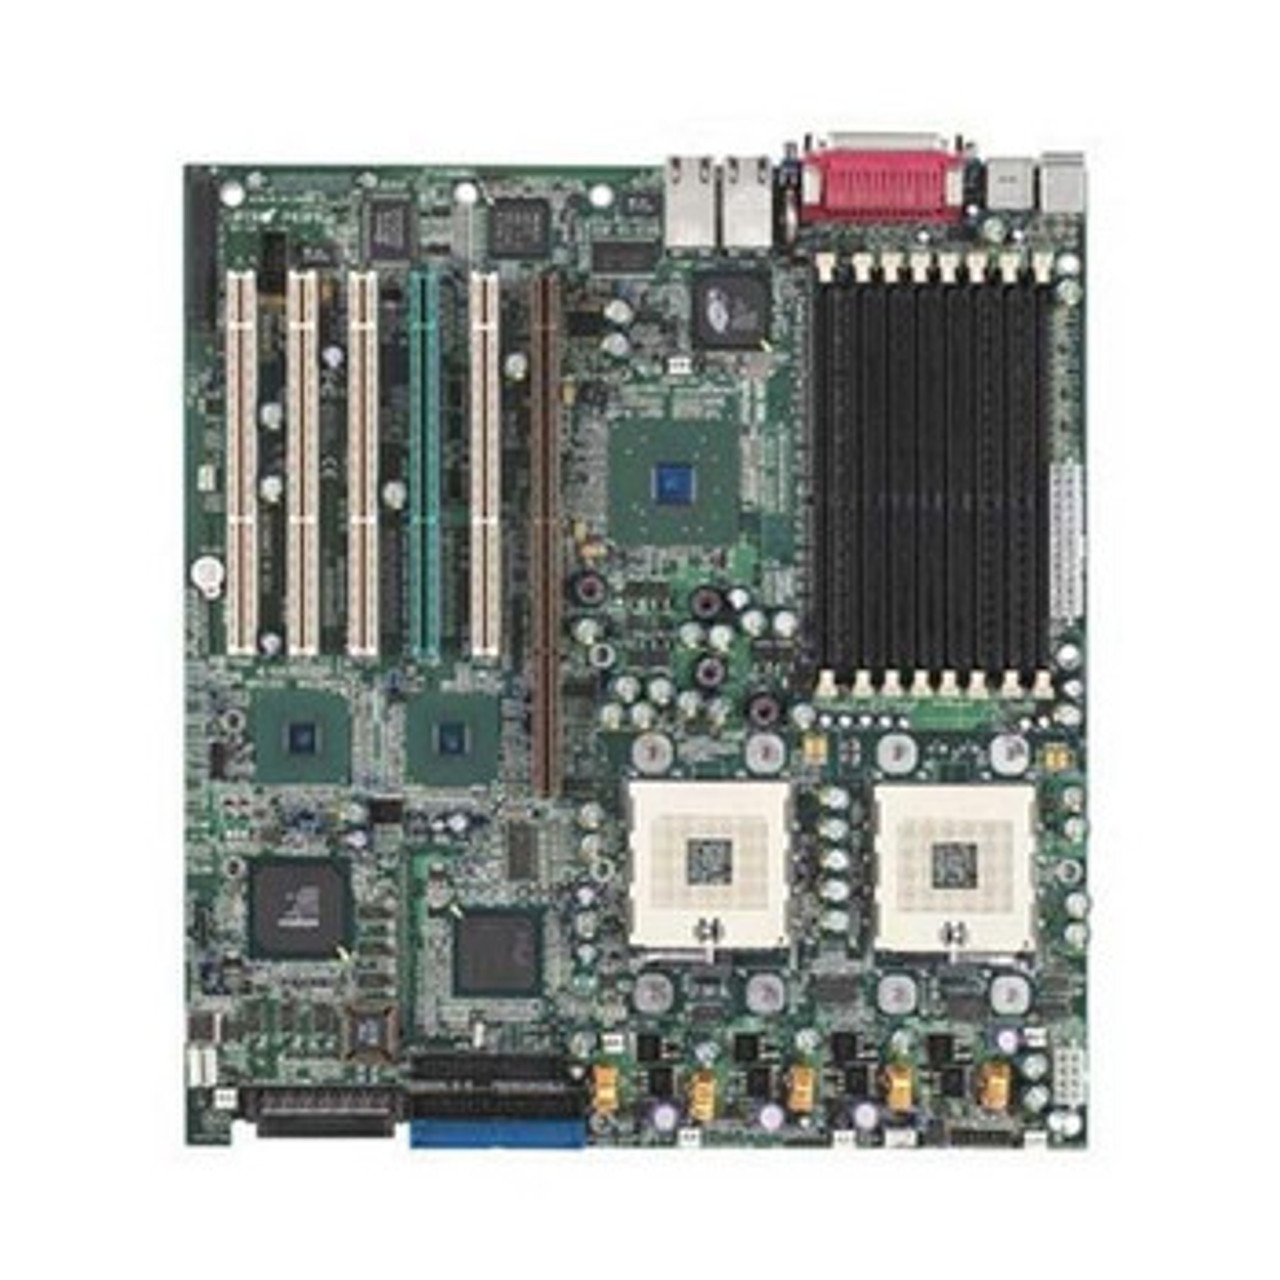 P4DP6 | Supermicro | Socket Mpga603 Intel Xeon E7500 Chipset Intel Xeon Processors Support Ddr 8X Dimm Extended-Atx Server Motherboard